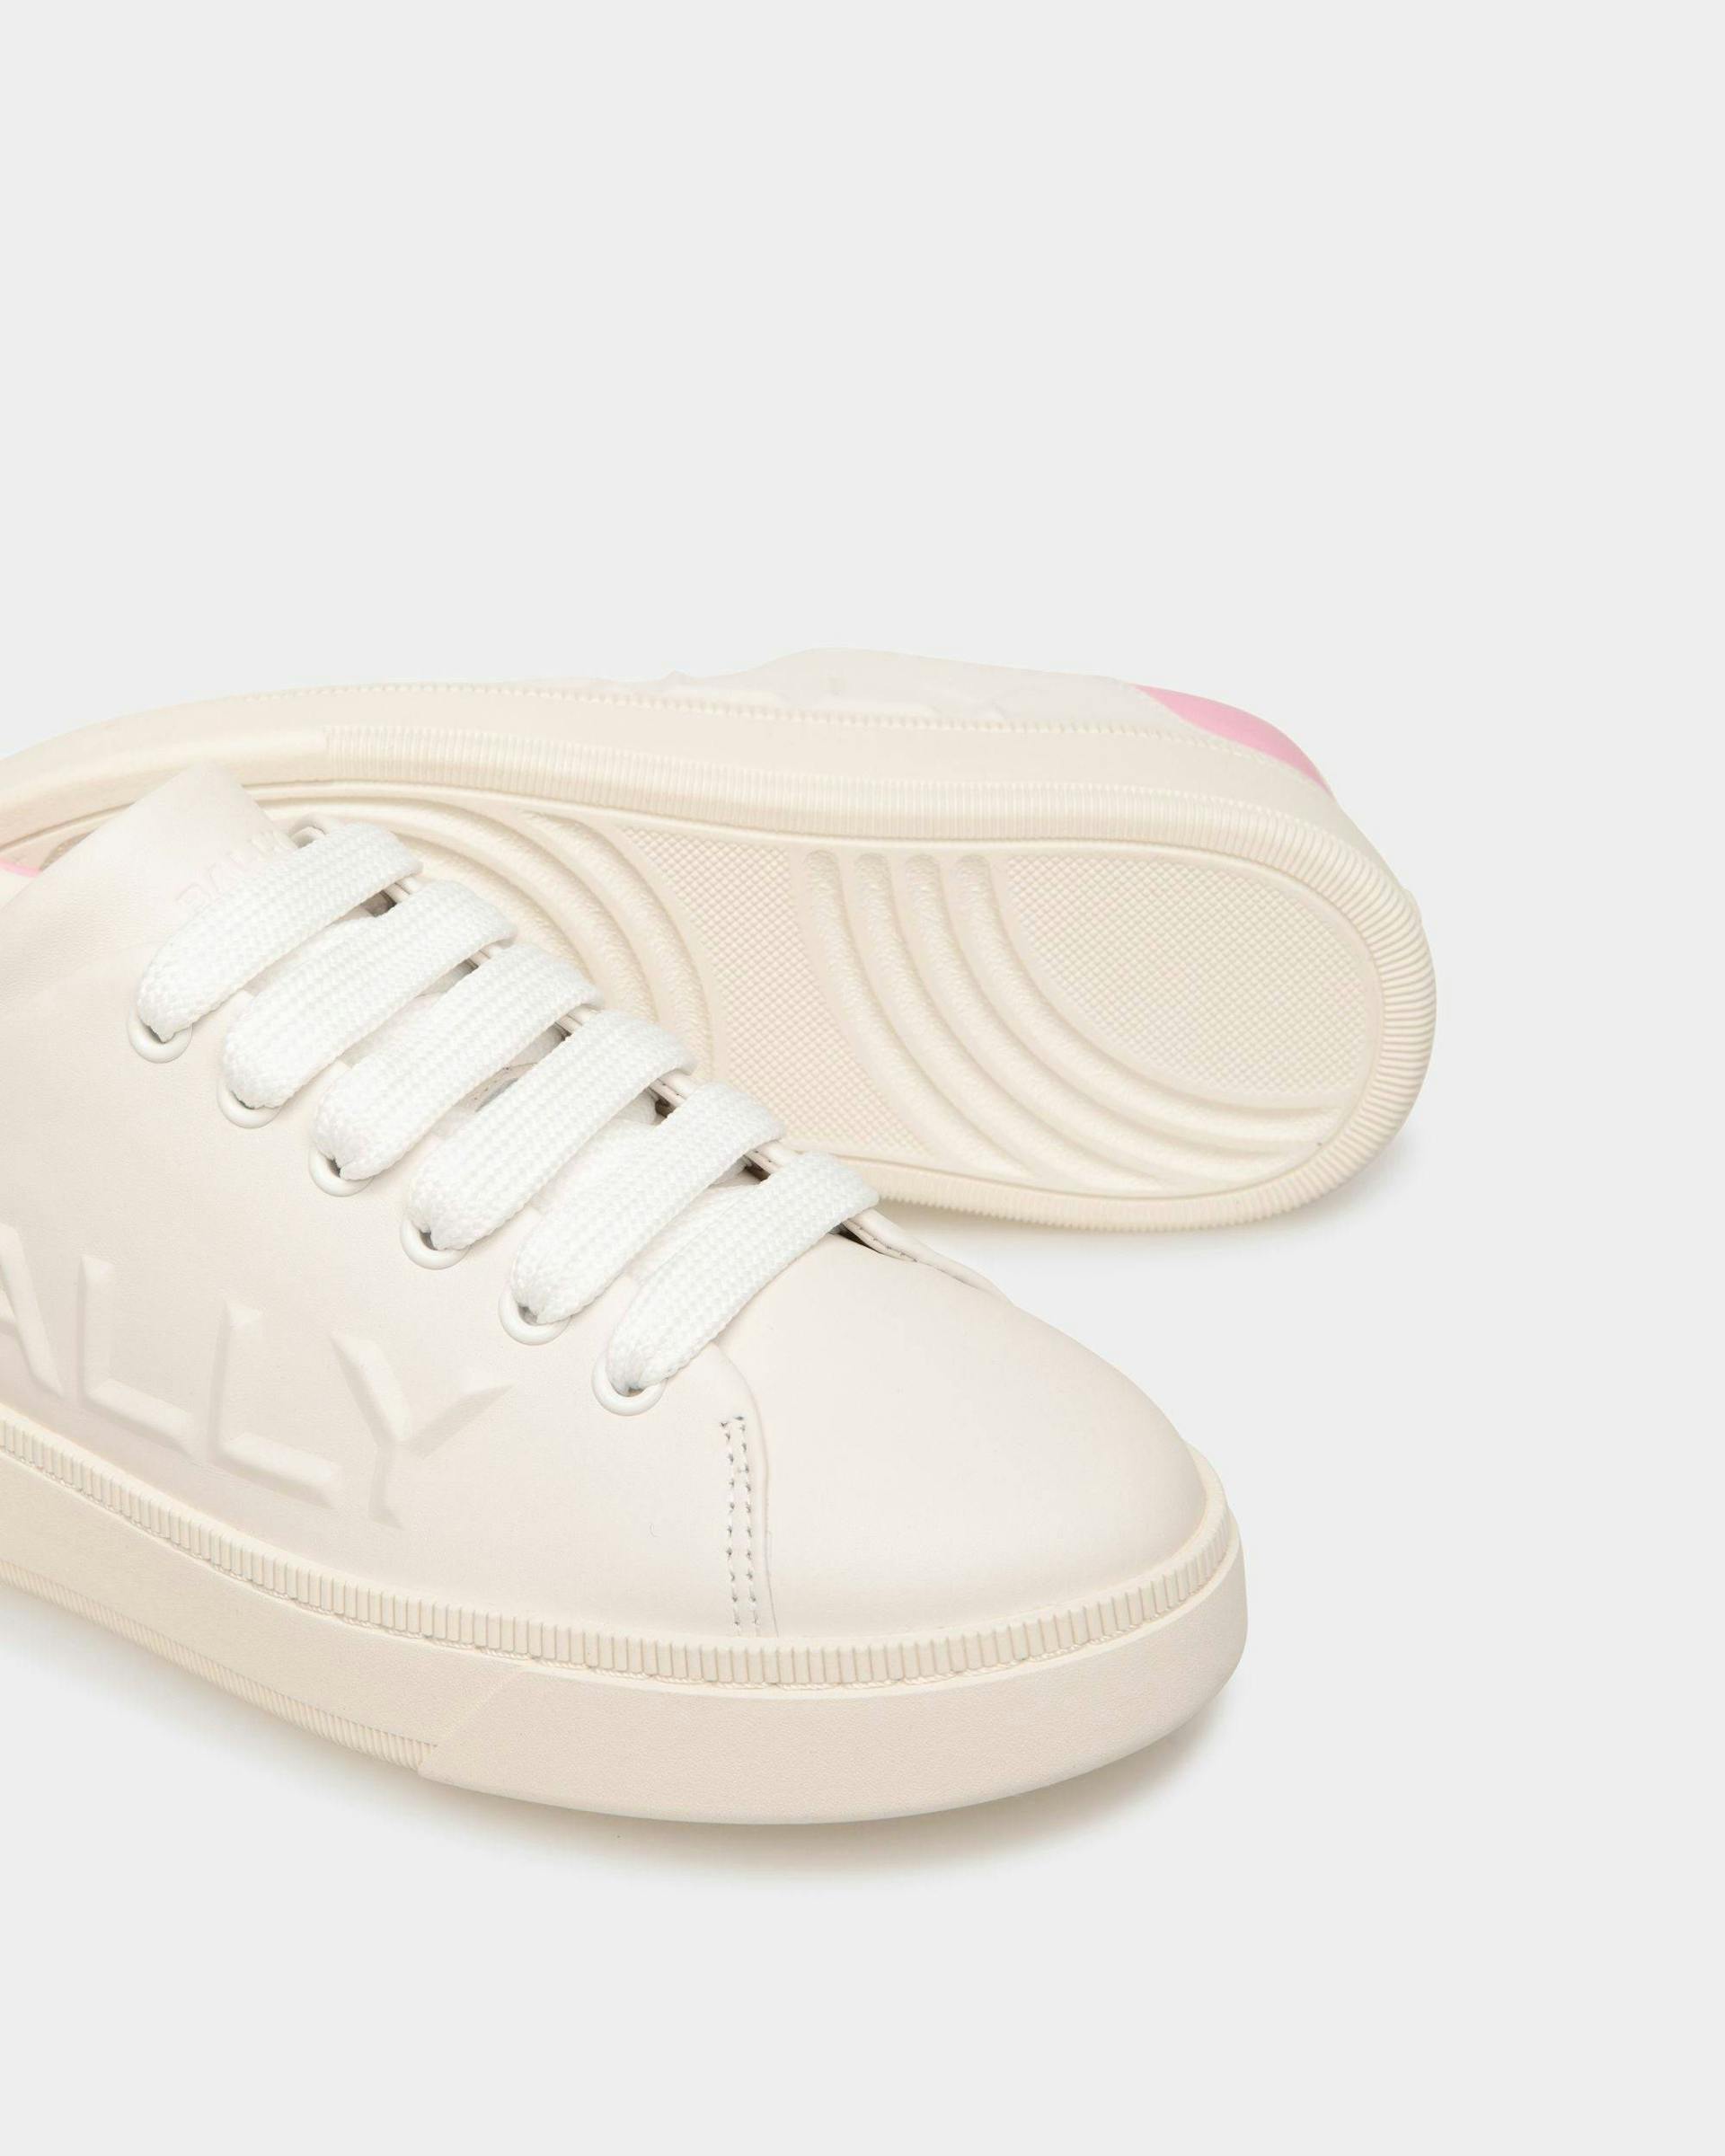 Women's Raise Sneaker In White And Pink Leather | Bally | Still Life Below